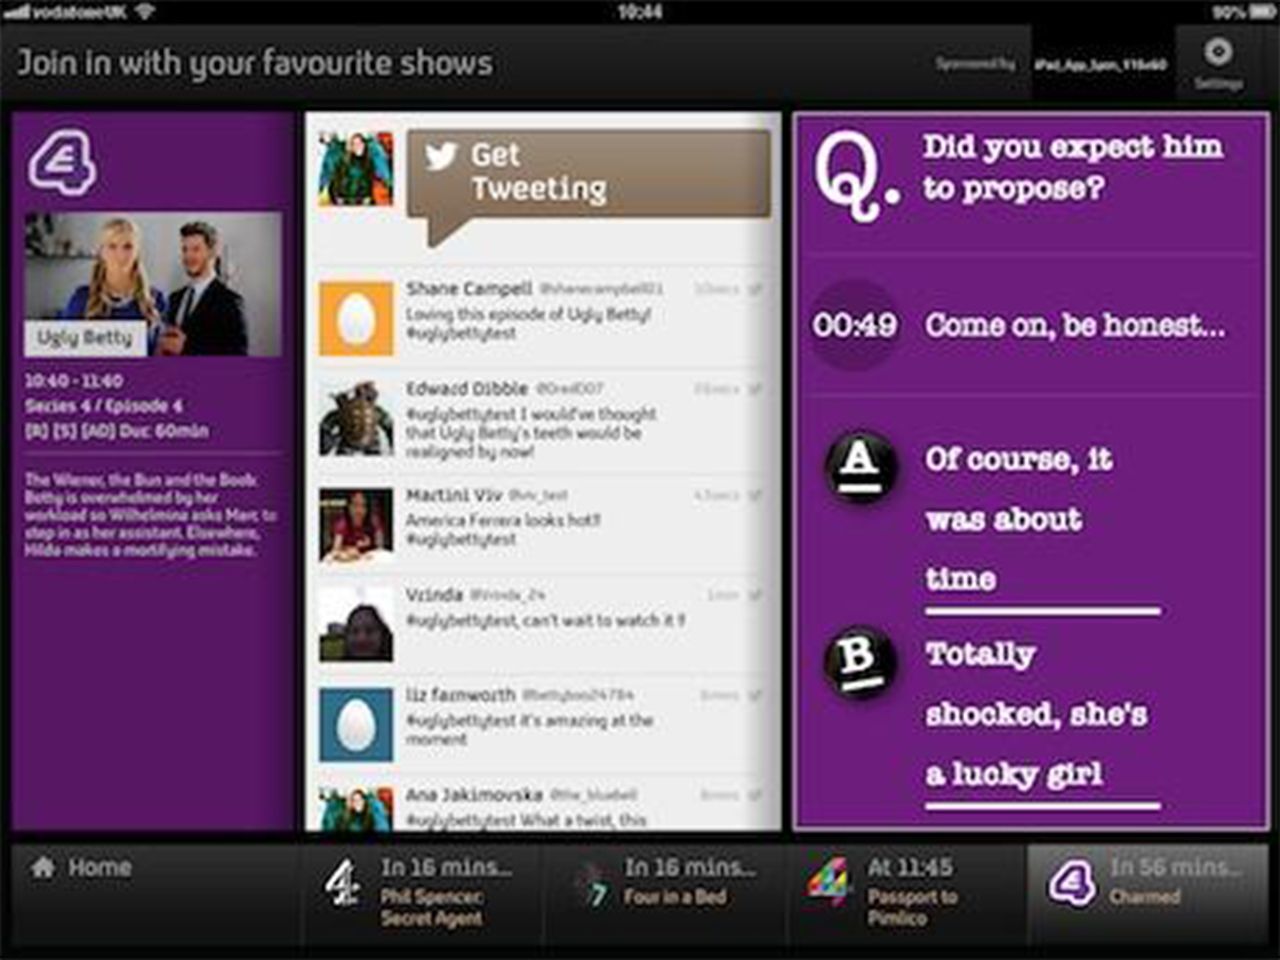 channel 4 launching second screen 4now companion app in july image 1